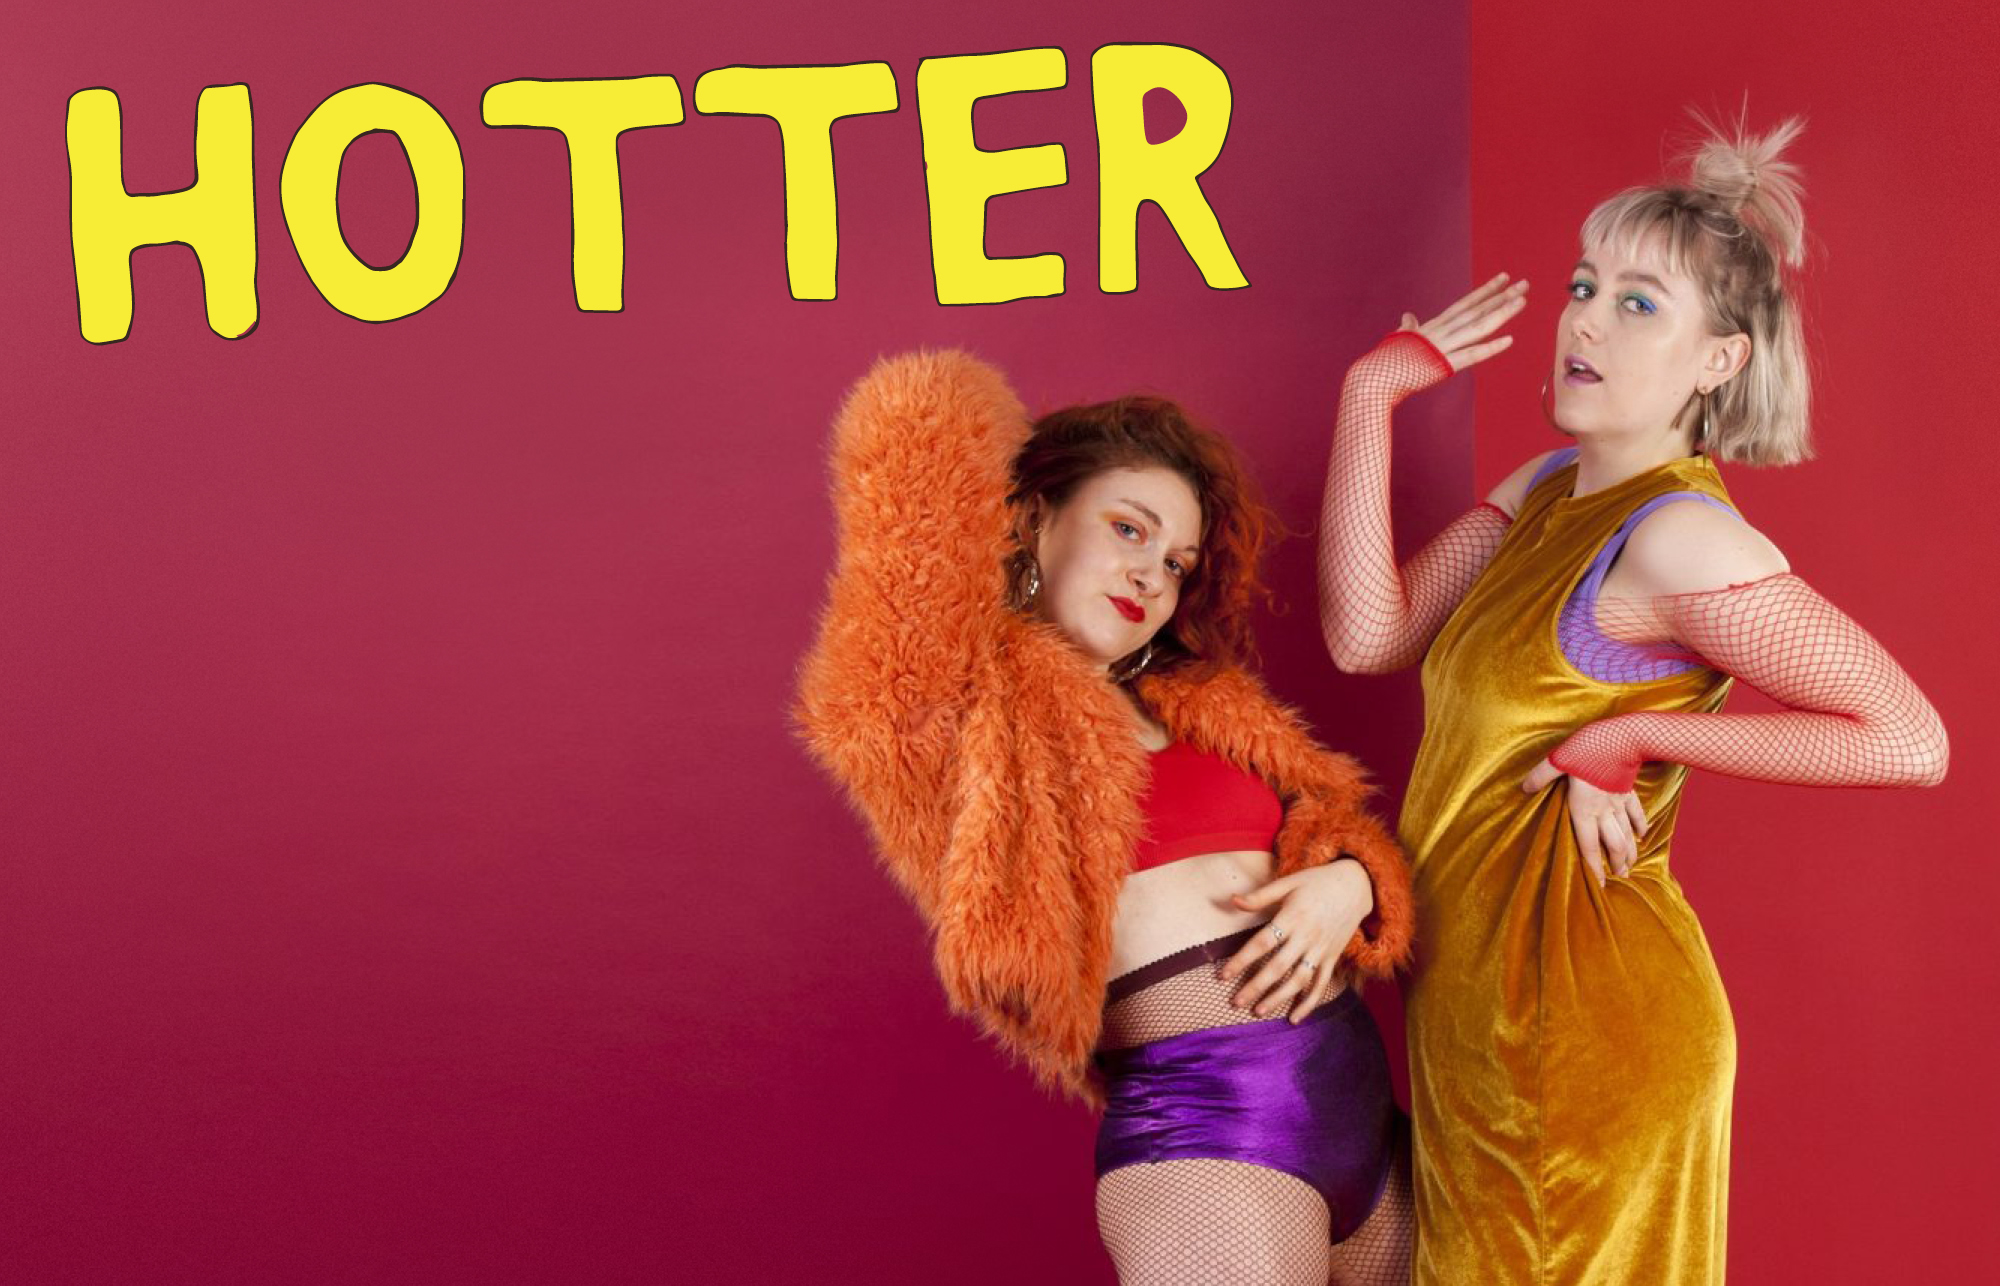 Ell and Mary pose against a red background wearing an array of colourful, textured clothing. Yellow text reads HOTTER in the top left corner.